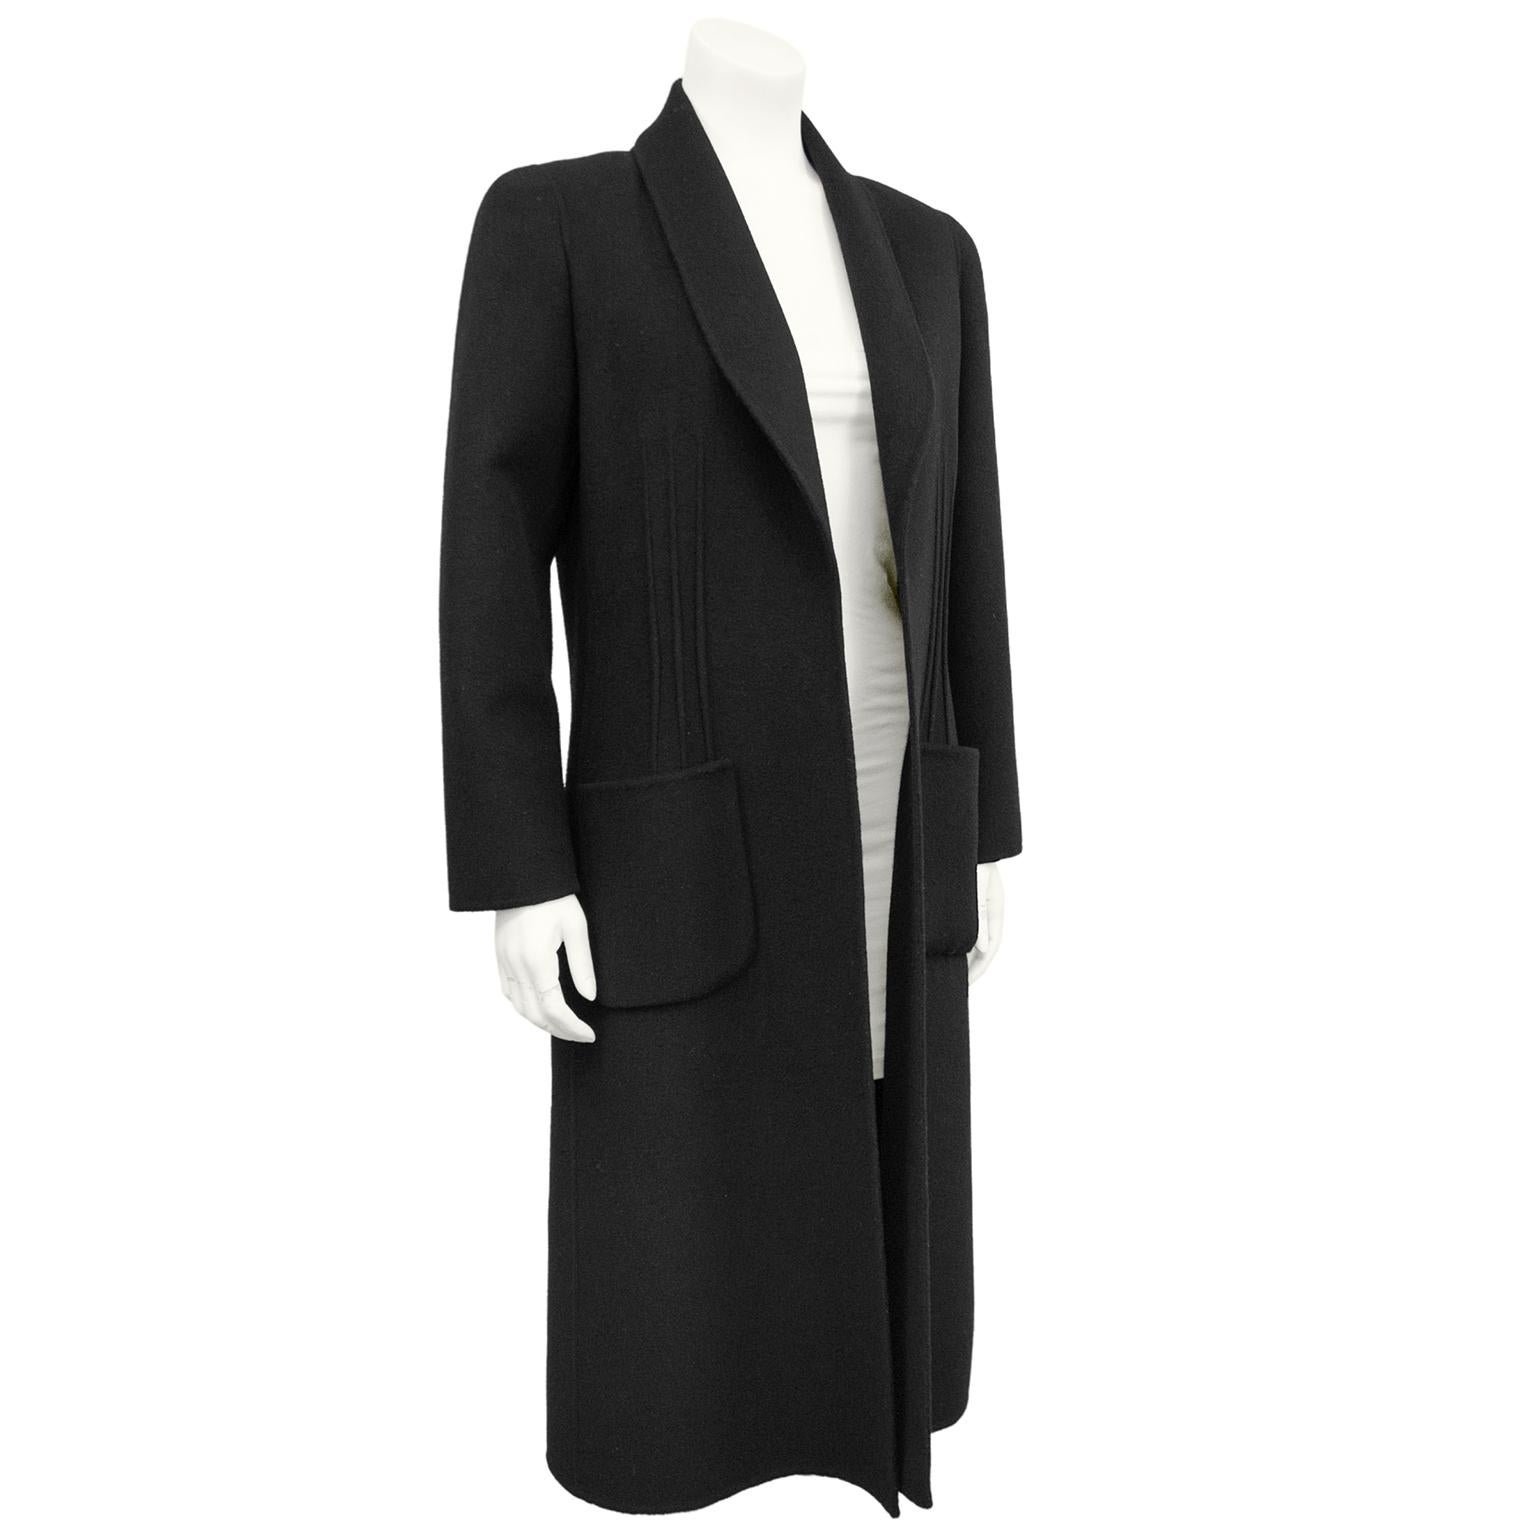 1980s Andre Laug black felted wool long coat. Long sleeves with shawl lapel and patch pockets. Designed to be worn open. Ribbed detail at seams. Unlined. Works like an easy light layer over anything from jeans to evening wear.  Excellent vintage